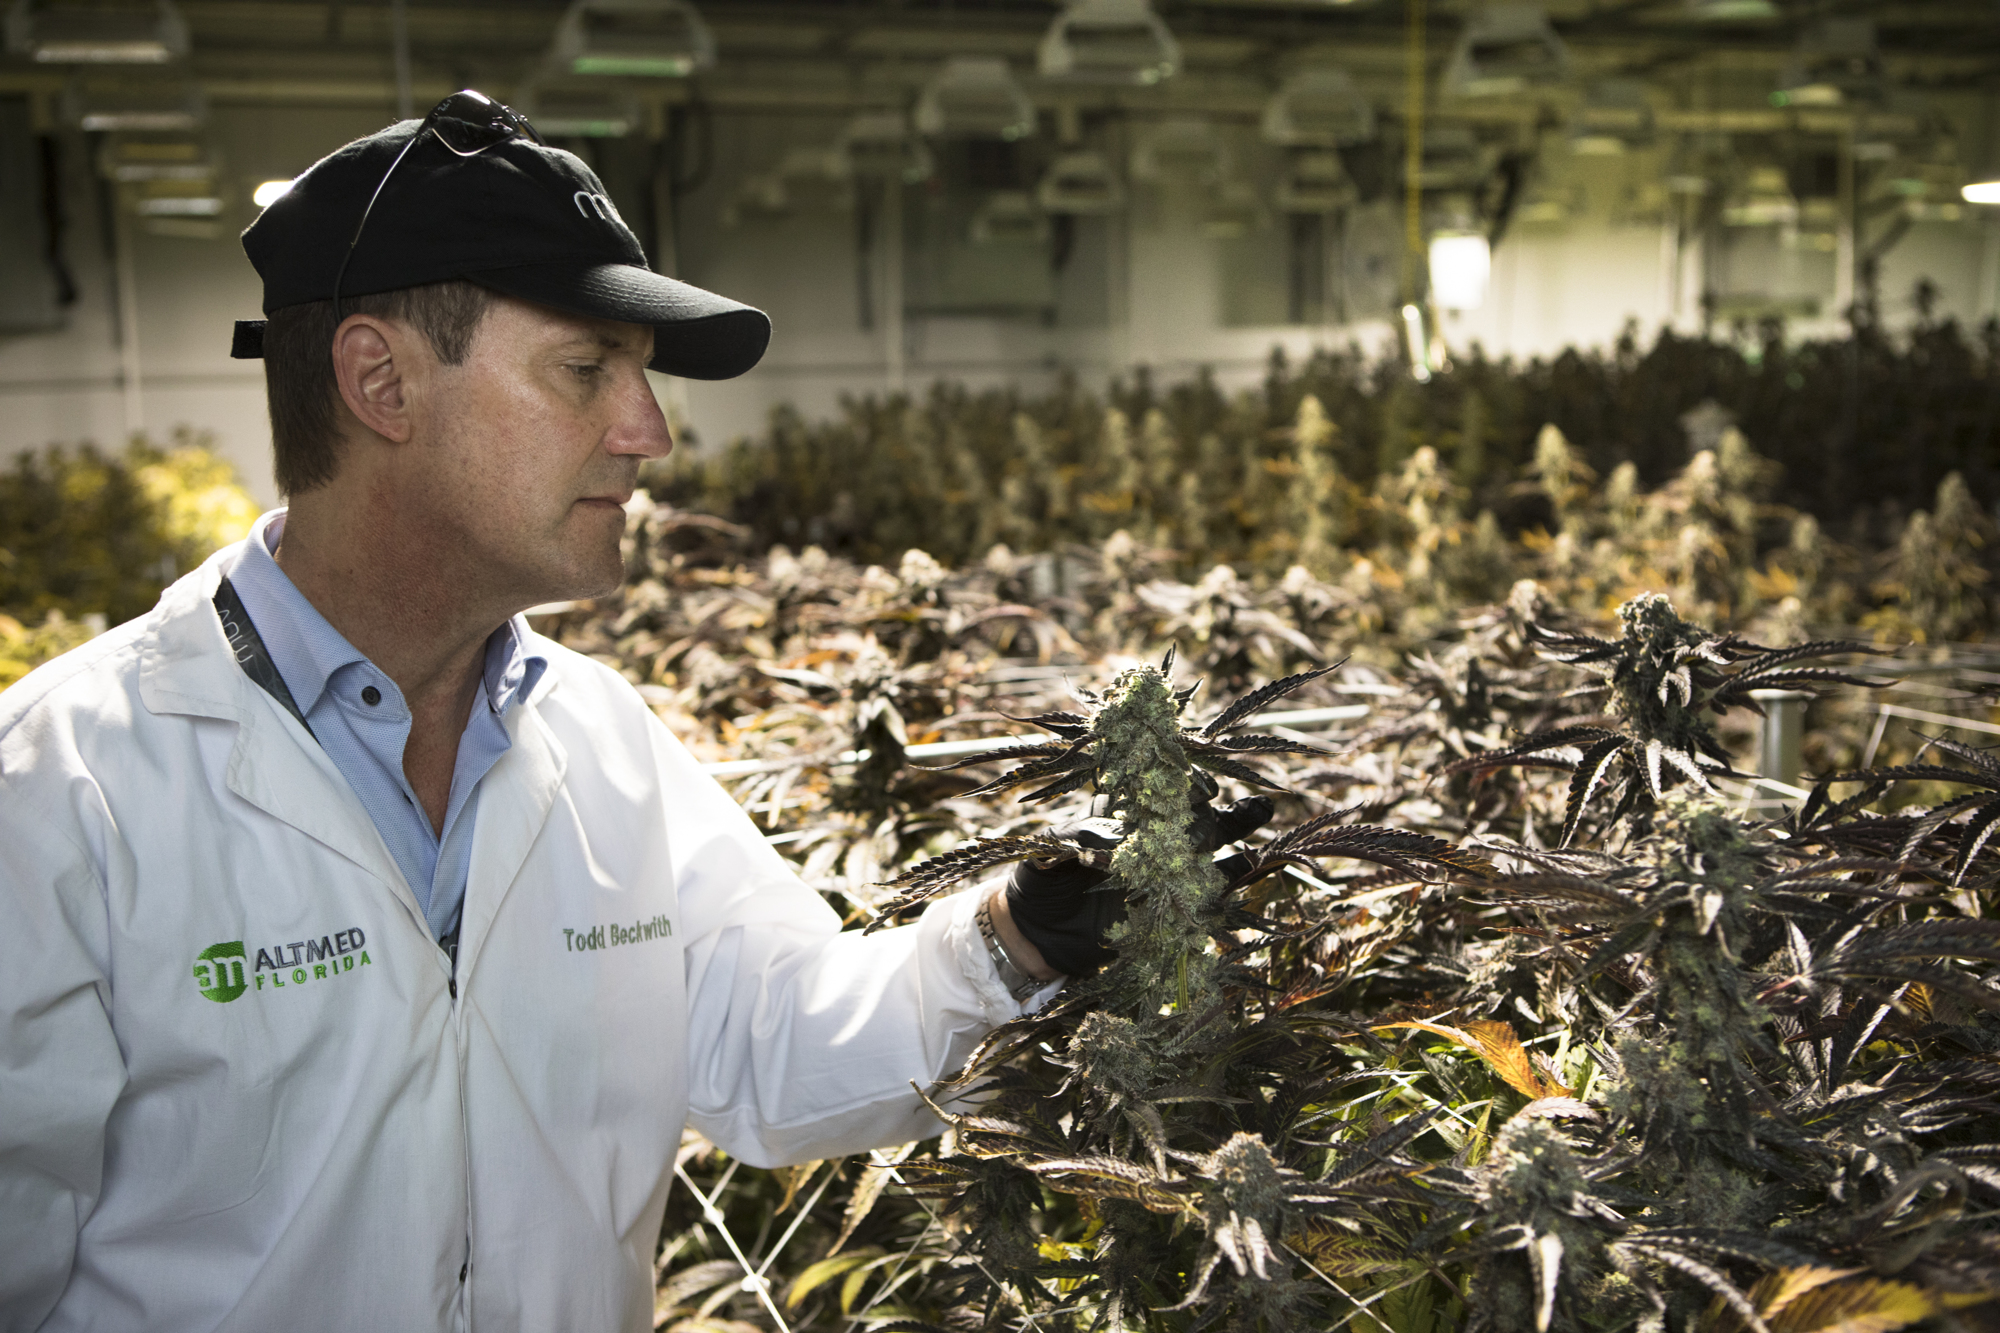 Courtesy. Todd Beckwith with AltMed examines plants at the company’s facility in Hillsborough County.